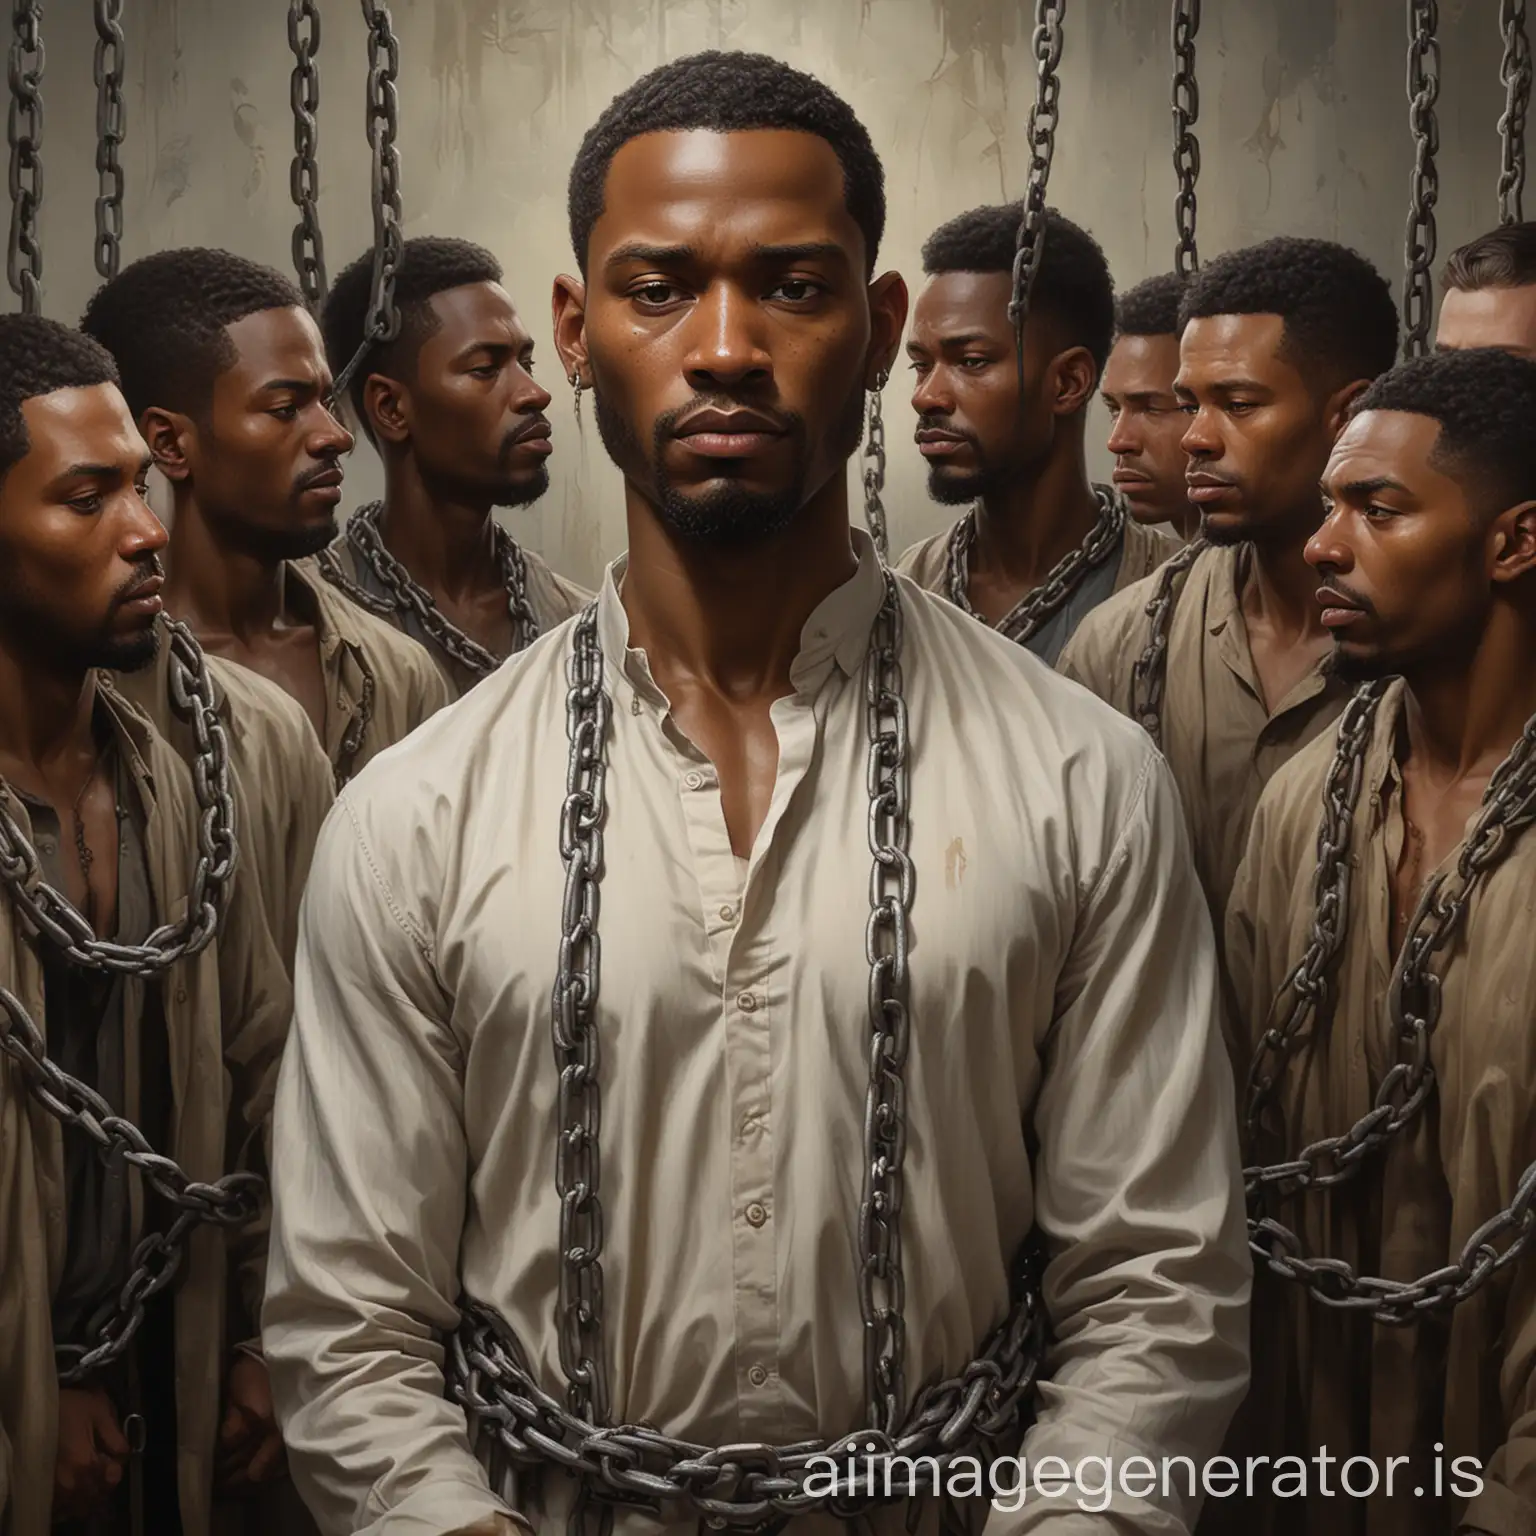 Dramatic-Portrait-Man-Wrapped-in-Chains-by-Pedro-Bell-Android-Jones-and-More